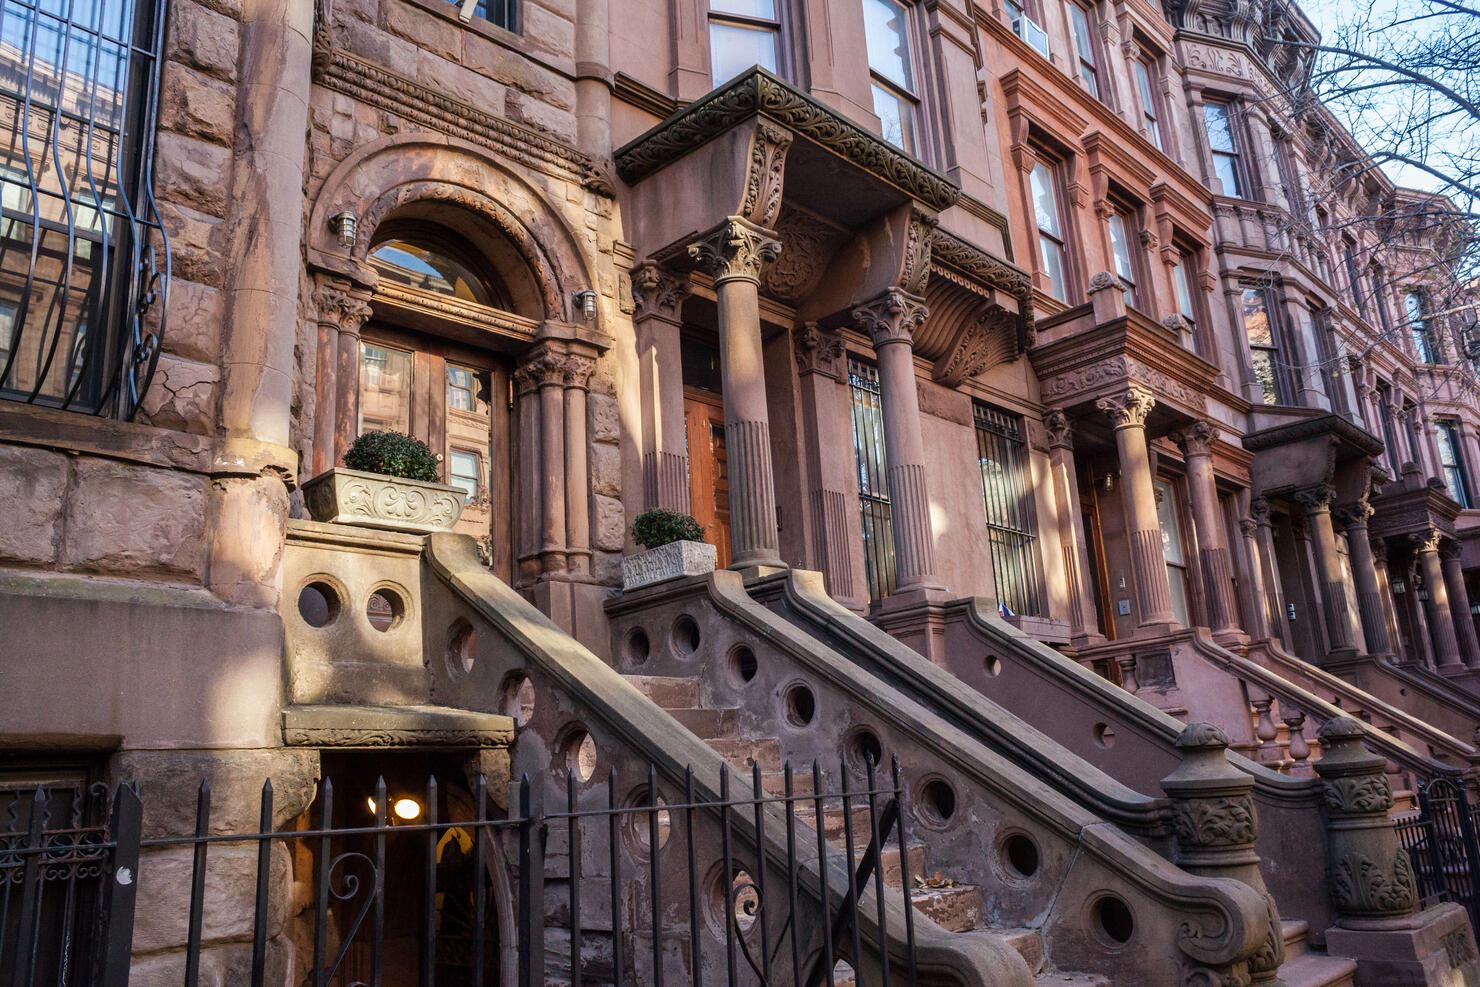 Gilded age brownstones in Manhattan. Real Estate. NYC.